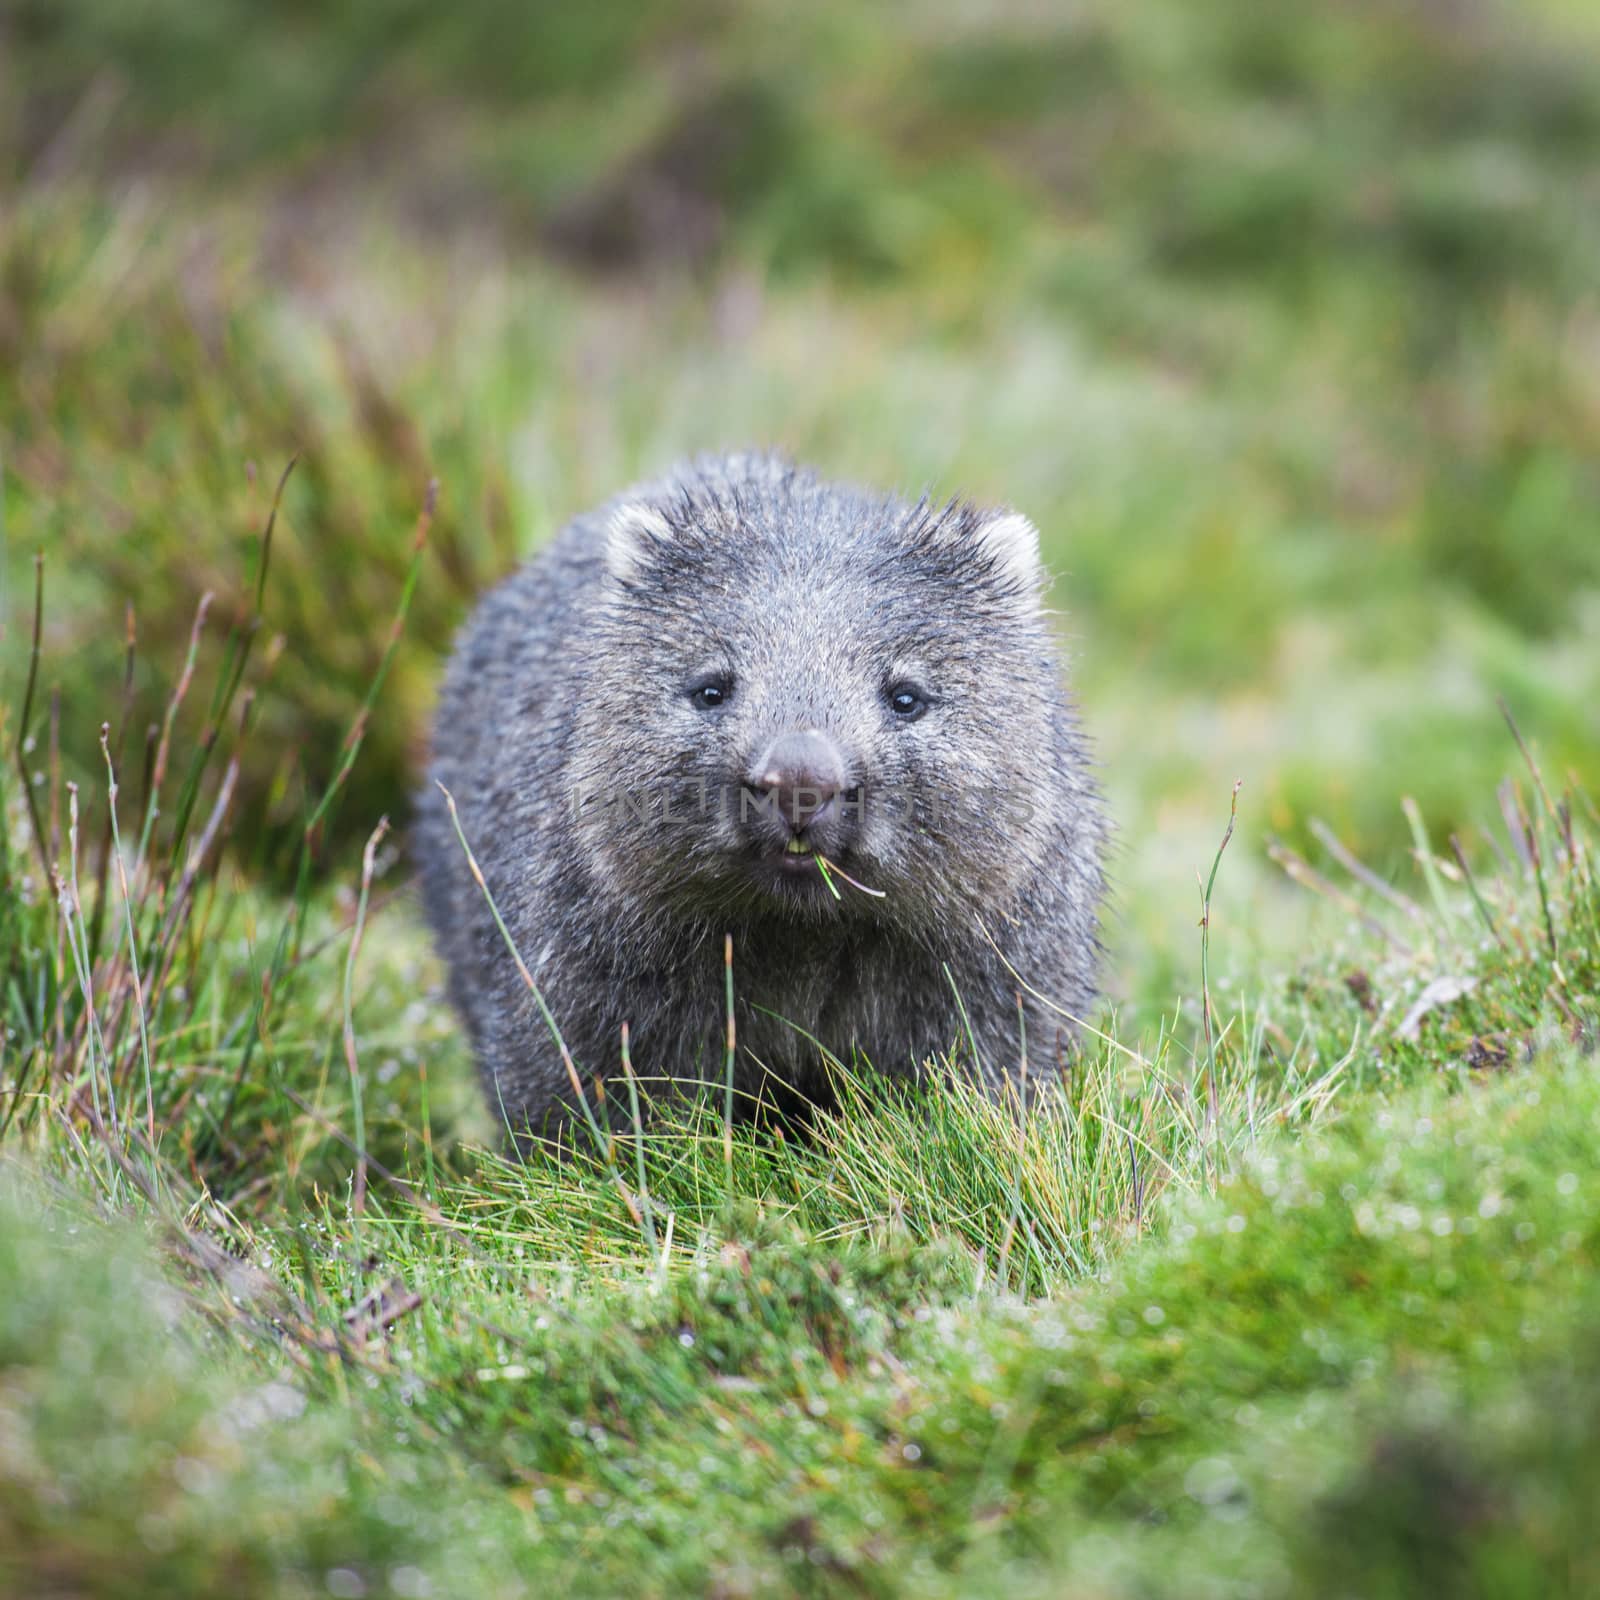 Wombat found during the day in Cradle Mountain, Tasmania 